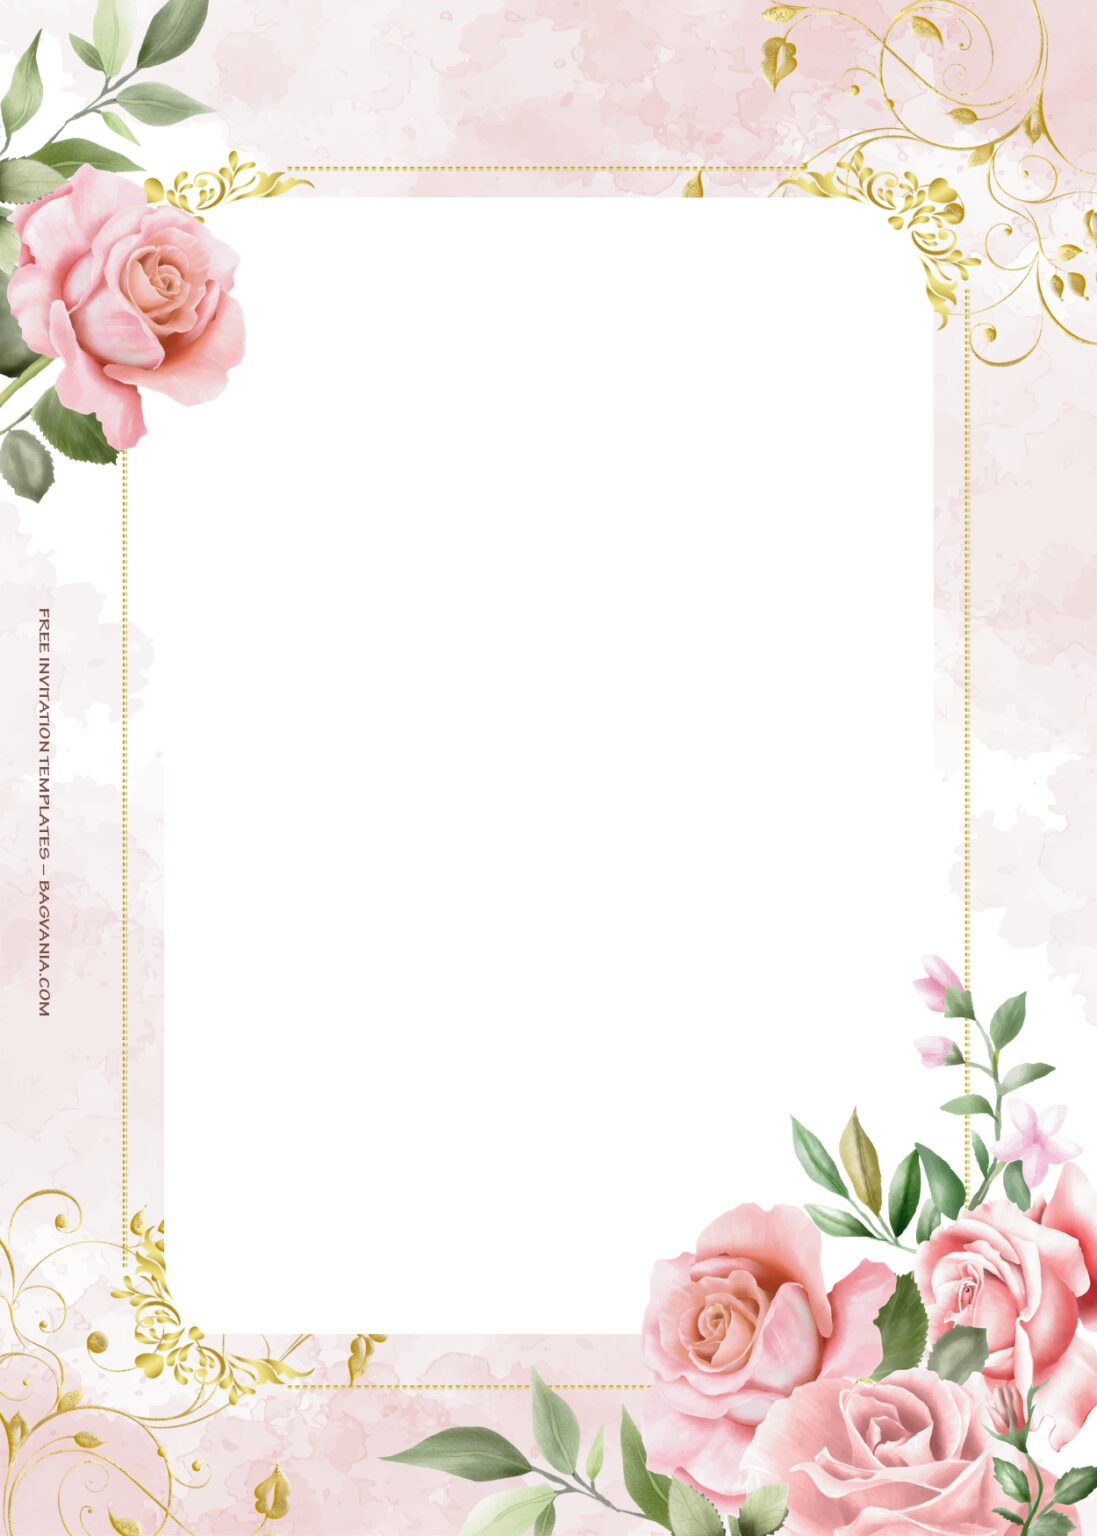 7+ Pinky Party Gold Floral Wedding Invitation Templates | FREE ...